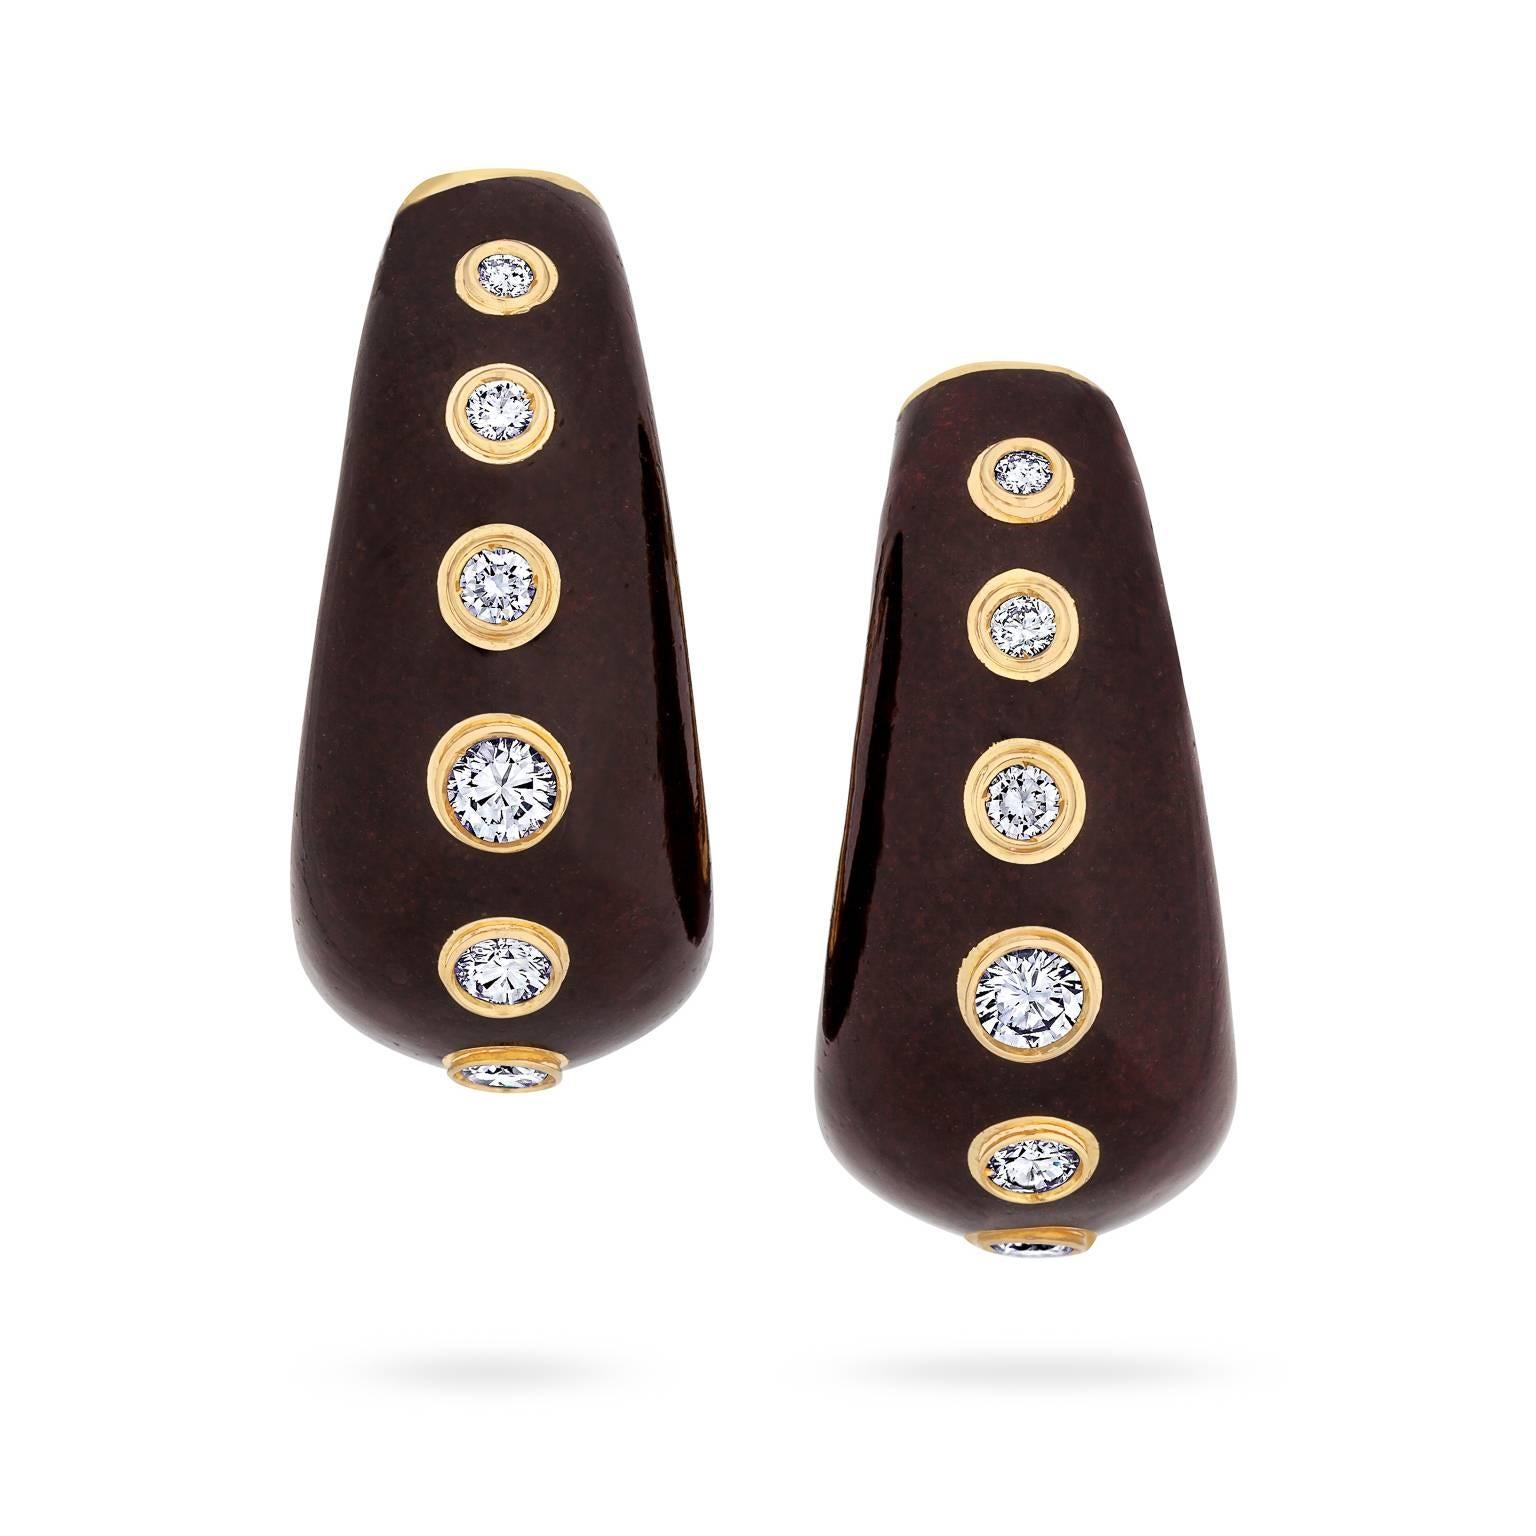 Hoop it up with these rare vintage Christian Dior diamond, gold, and enamel earrings!  Created in France in the 1970's, these chic oval shaped hoops are 18 karat yellow gold enameled in rich chocolate brown with a total of 1.50 carats of round bezel